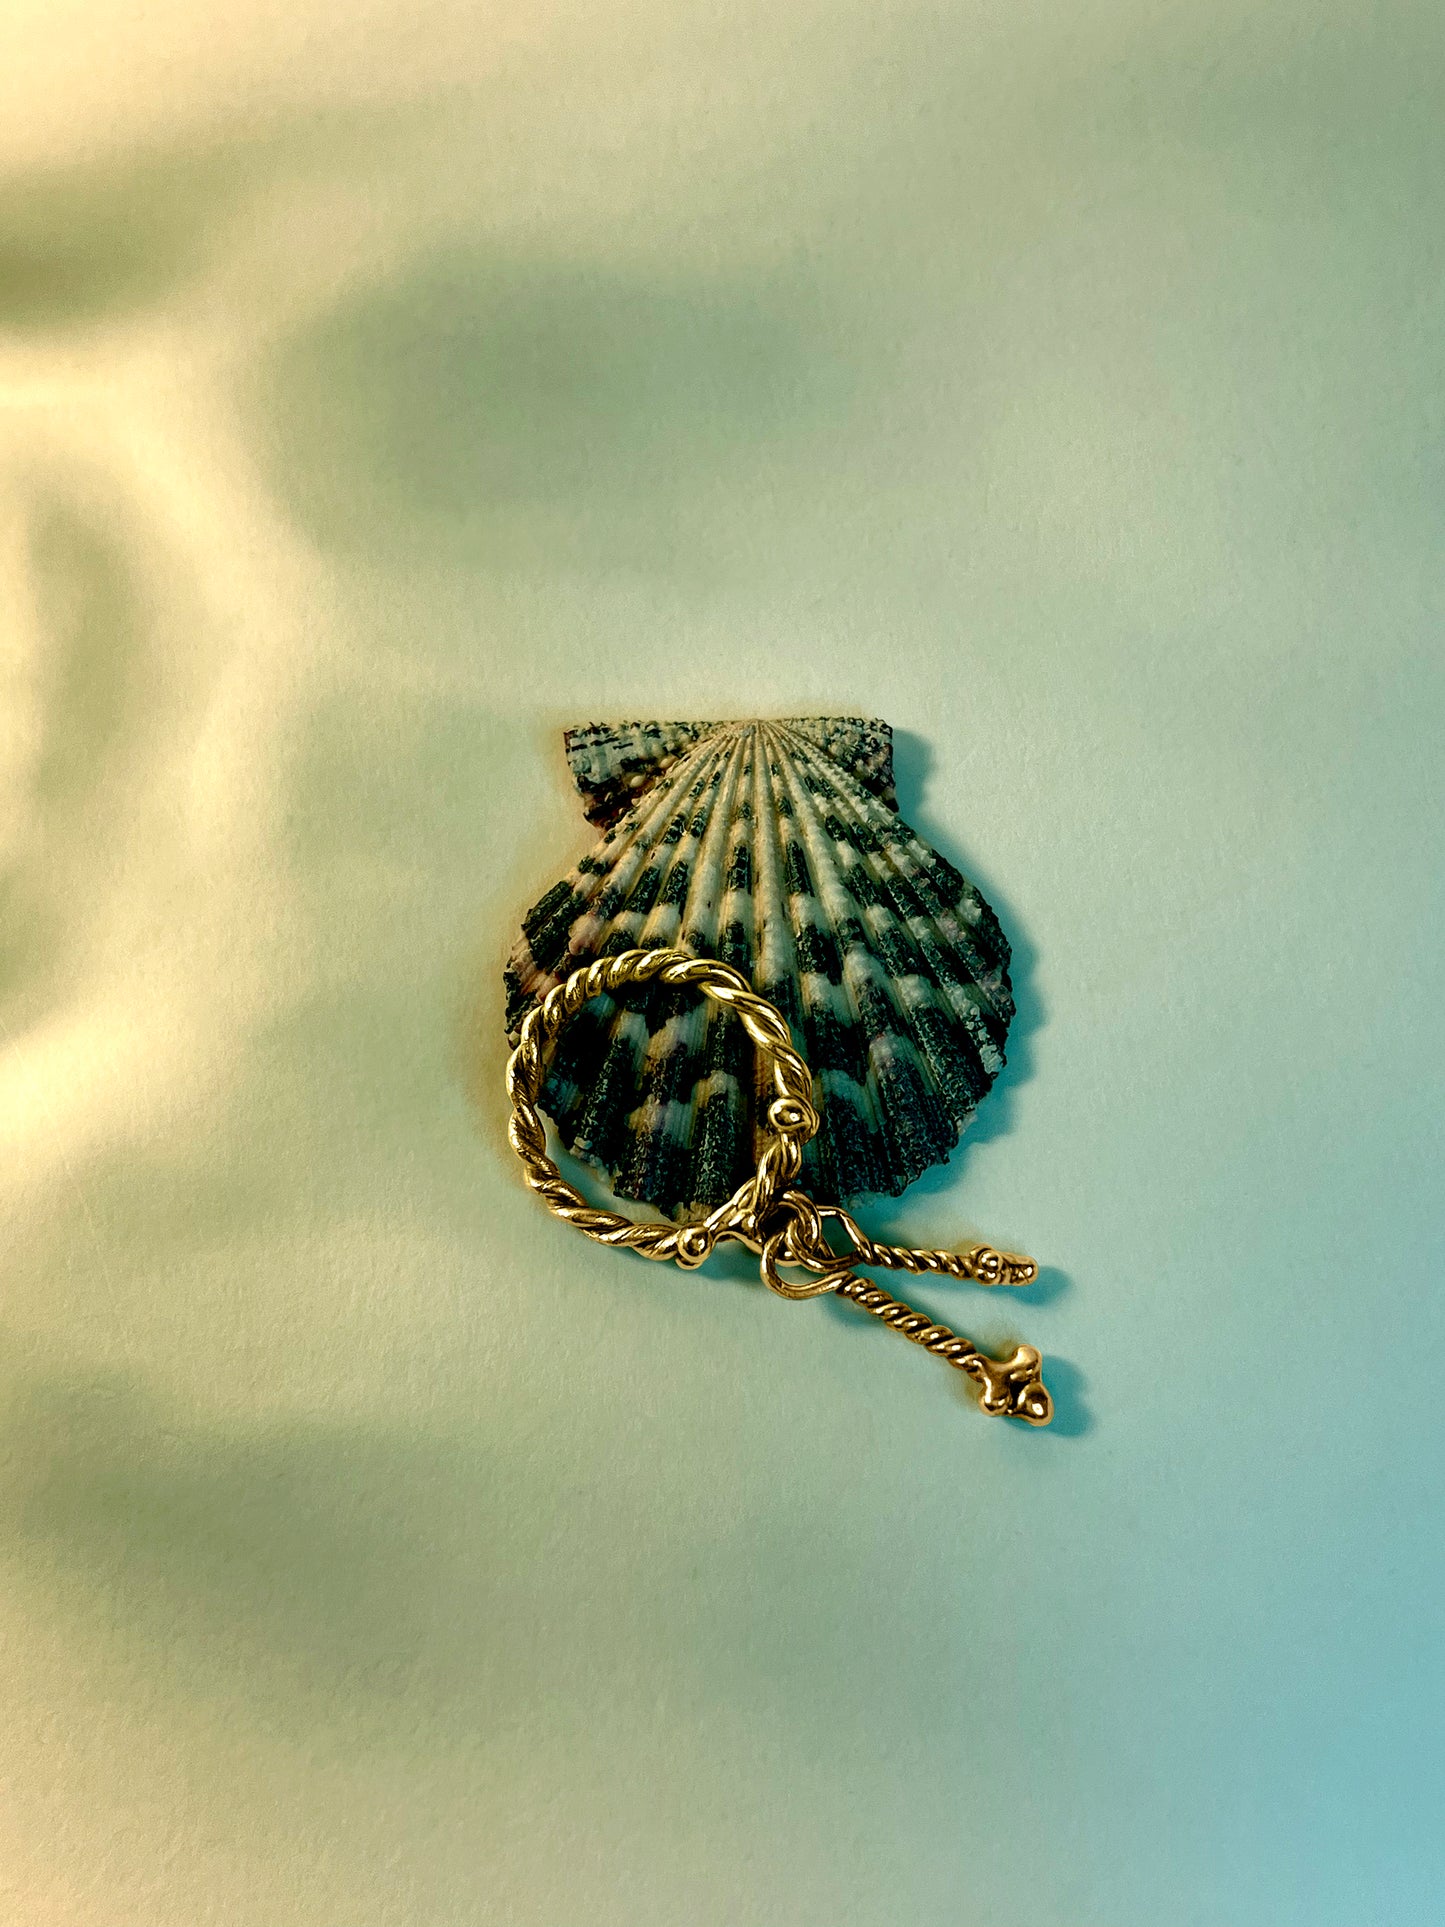 A 18K Gold Vermeil Twisted Fates Ring by CLARK rests against a seashell. Bathed in a dappled blue light - the scene feels organic and mystical. This ring is hand-made using the lost wax cast method so each charm is unique and one-of-a-kind. 